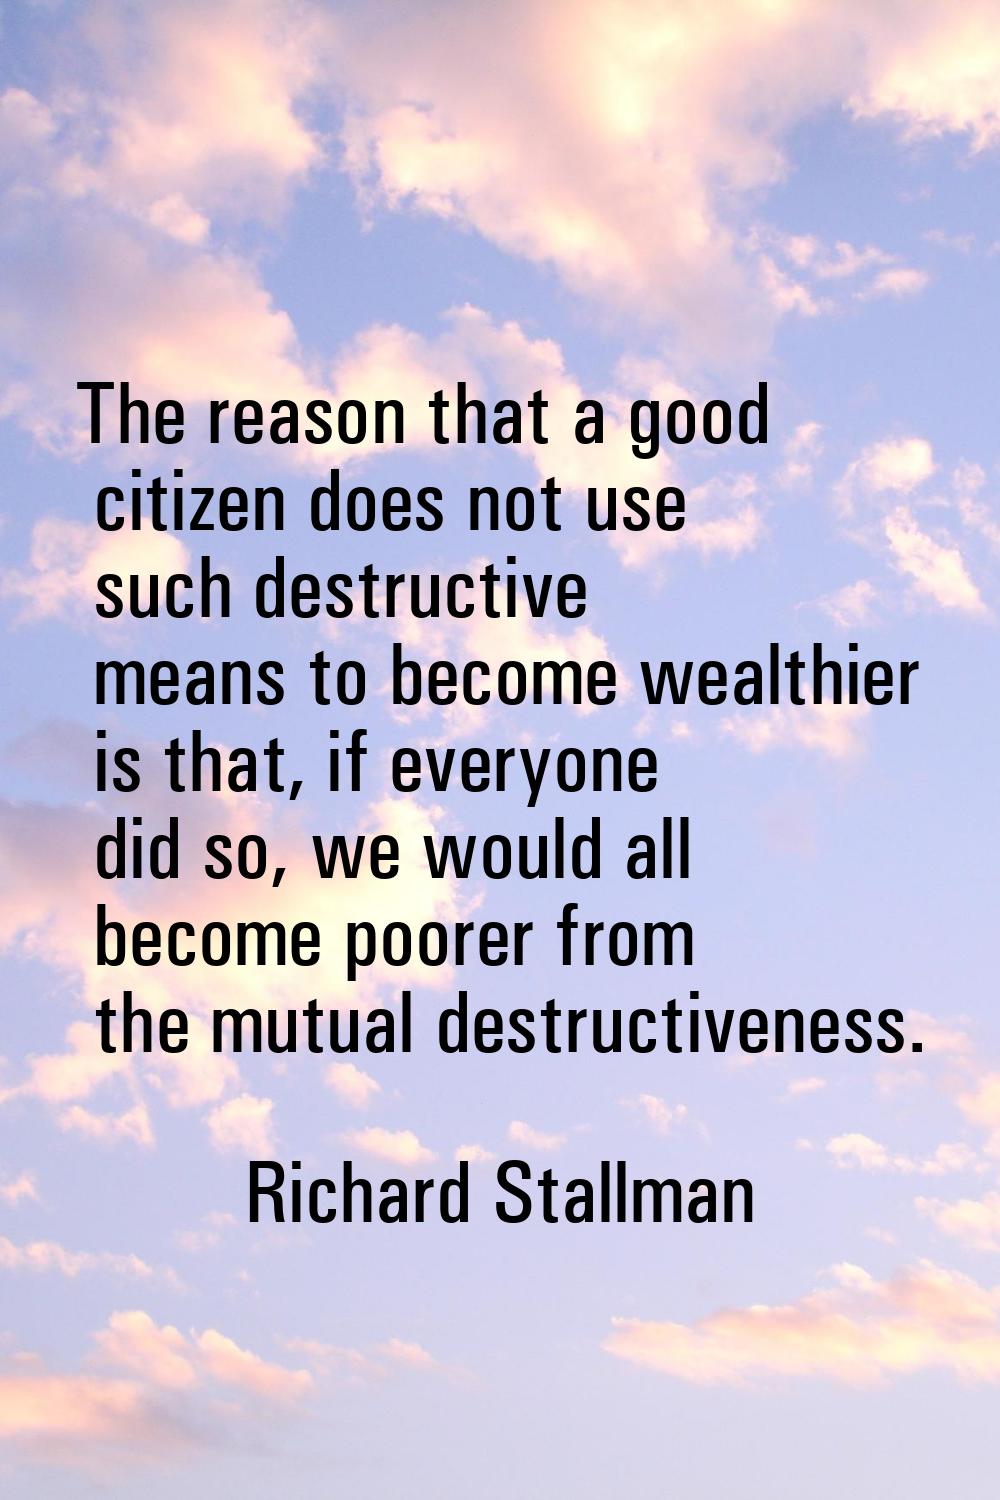 The reason that a good citizen does not use such destructive means to become wealthier is that, if 